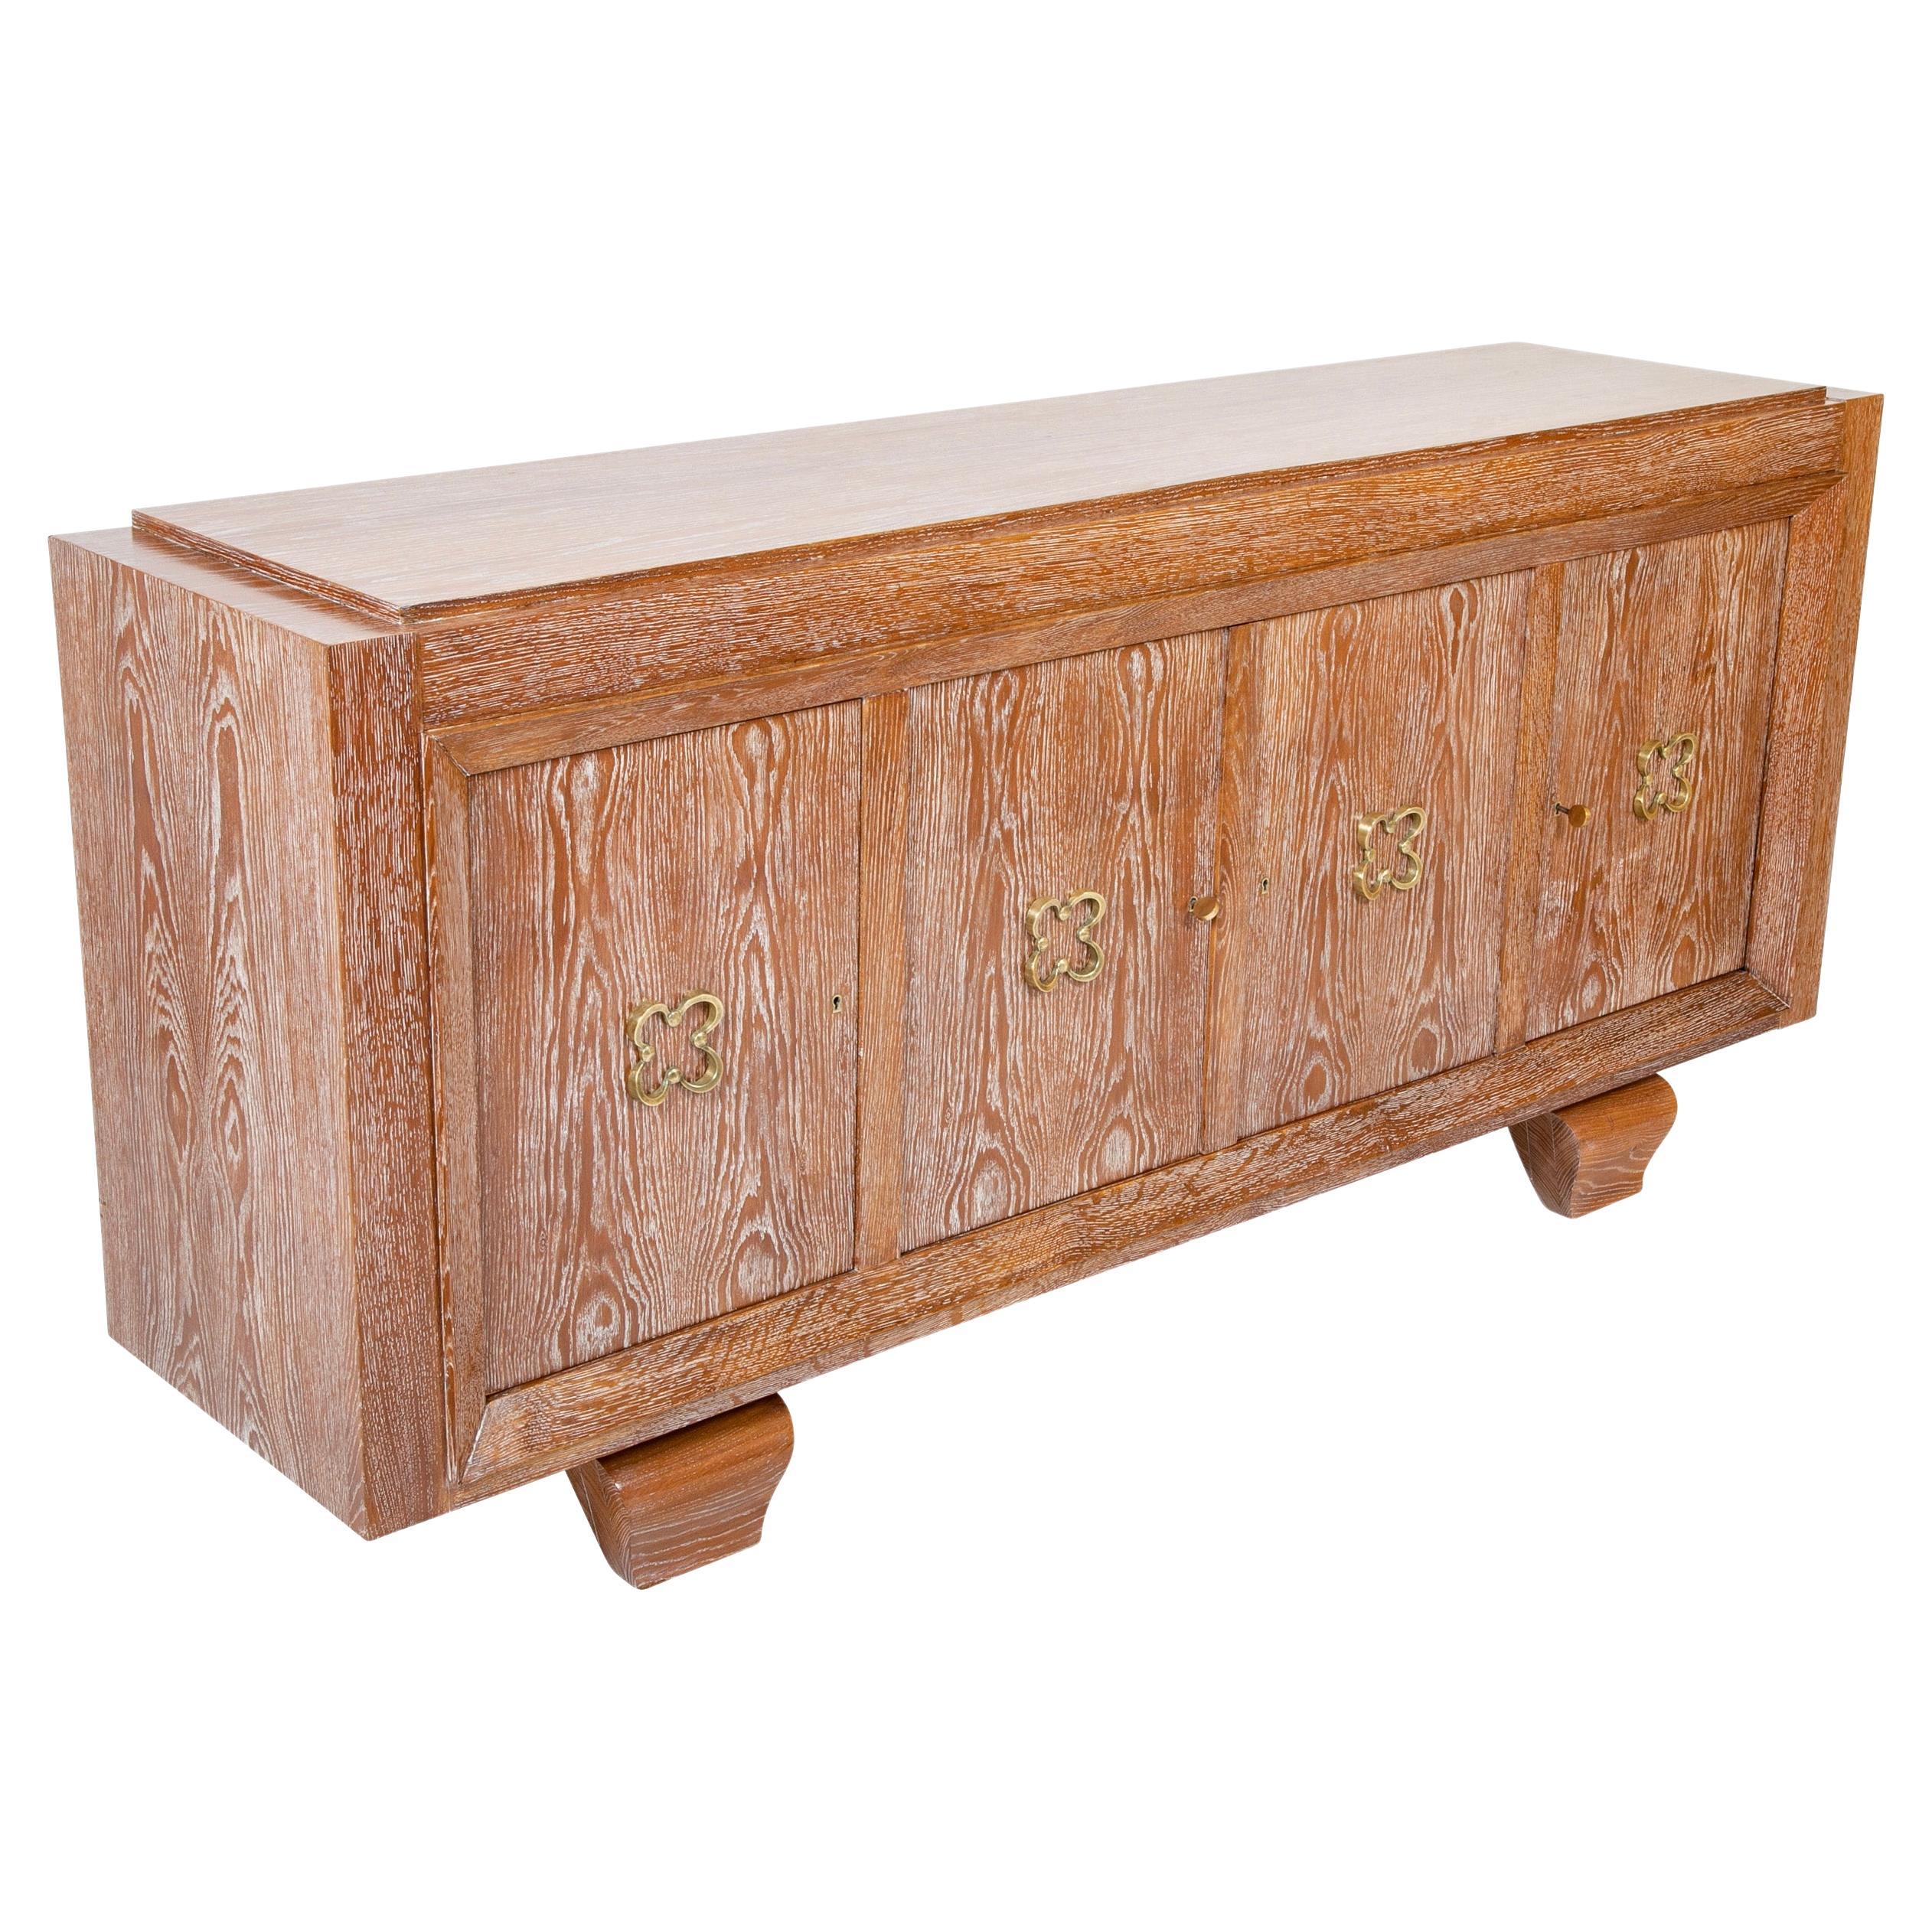 A Mid-Century French Cerused Oak Sideboard In The Manner of Jean Royere For Sale